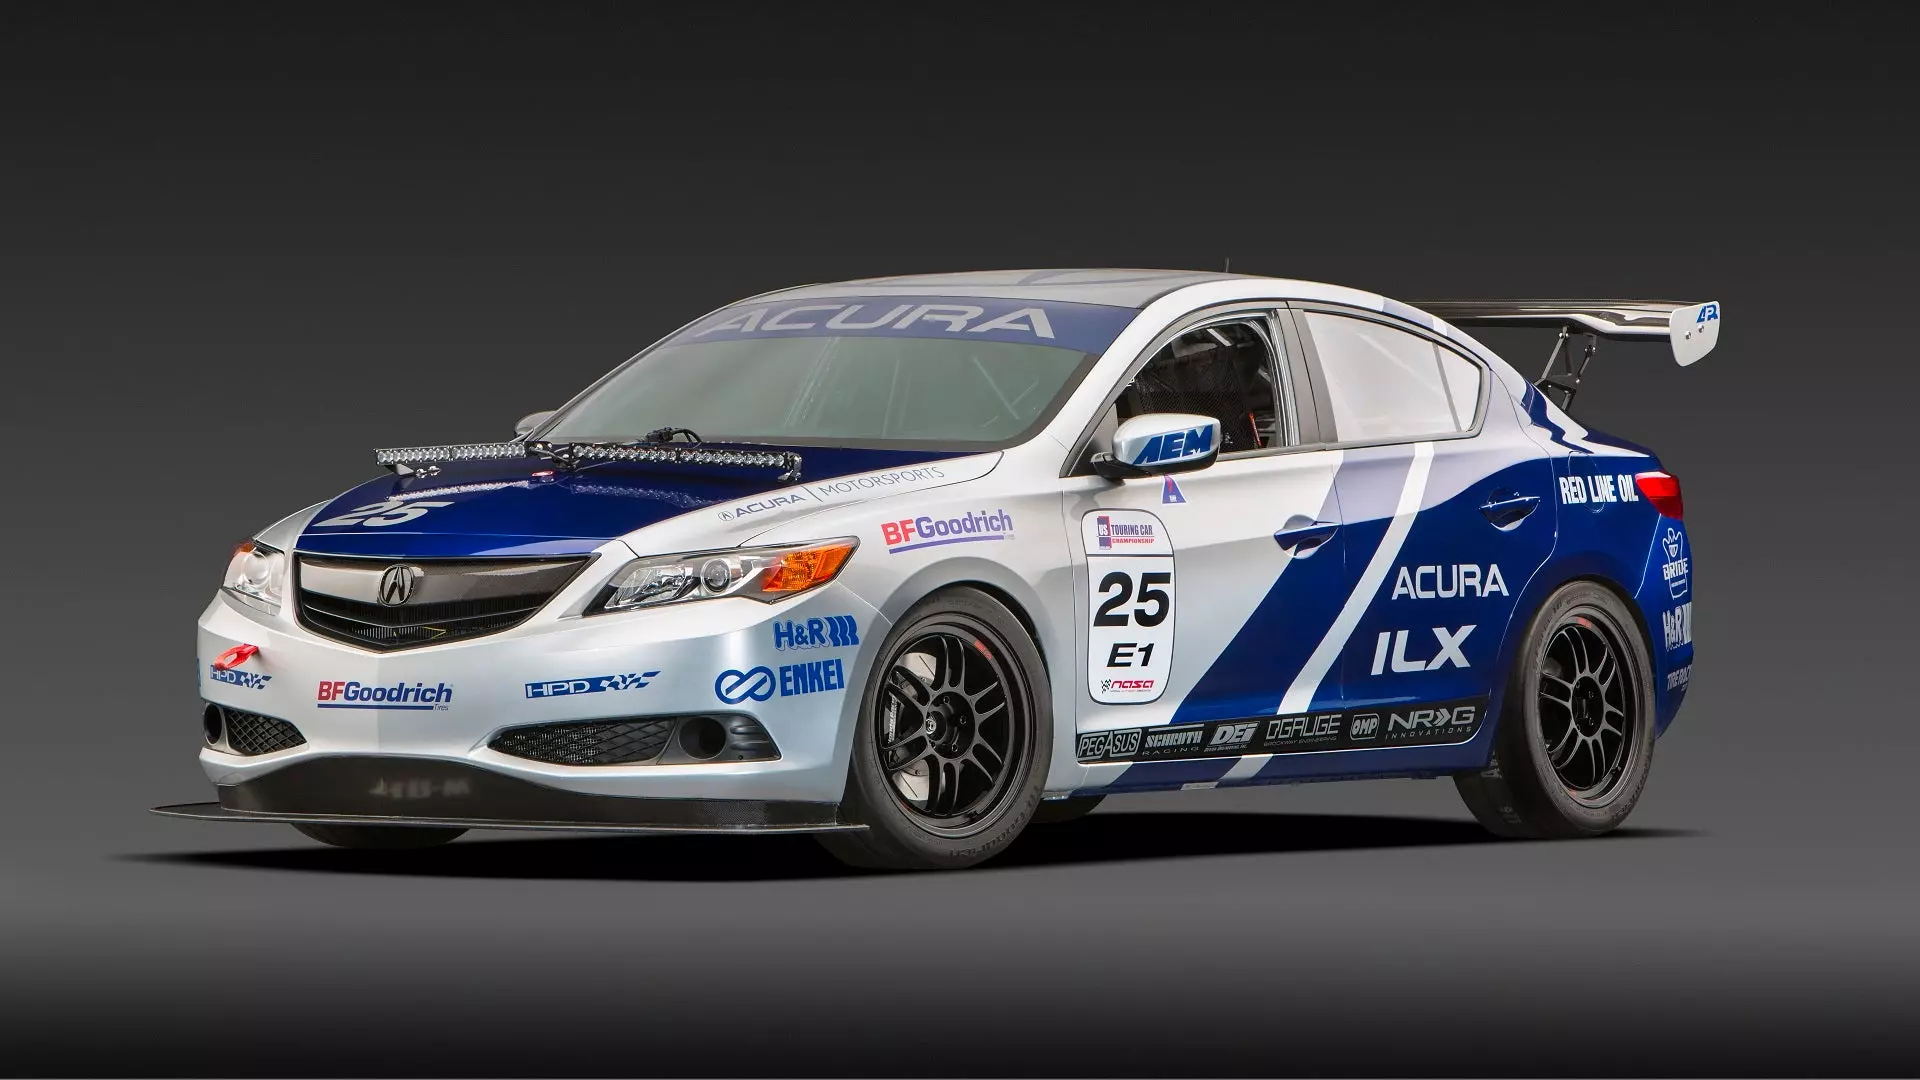 The Overlooked Acura ILX Completely Transforms When in Racecar Garb